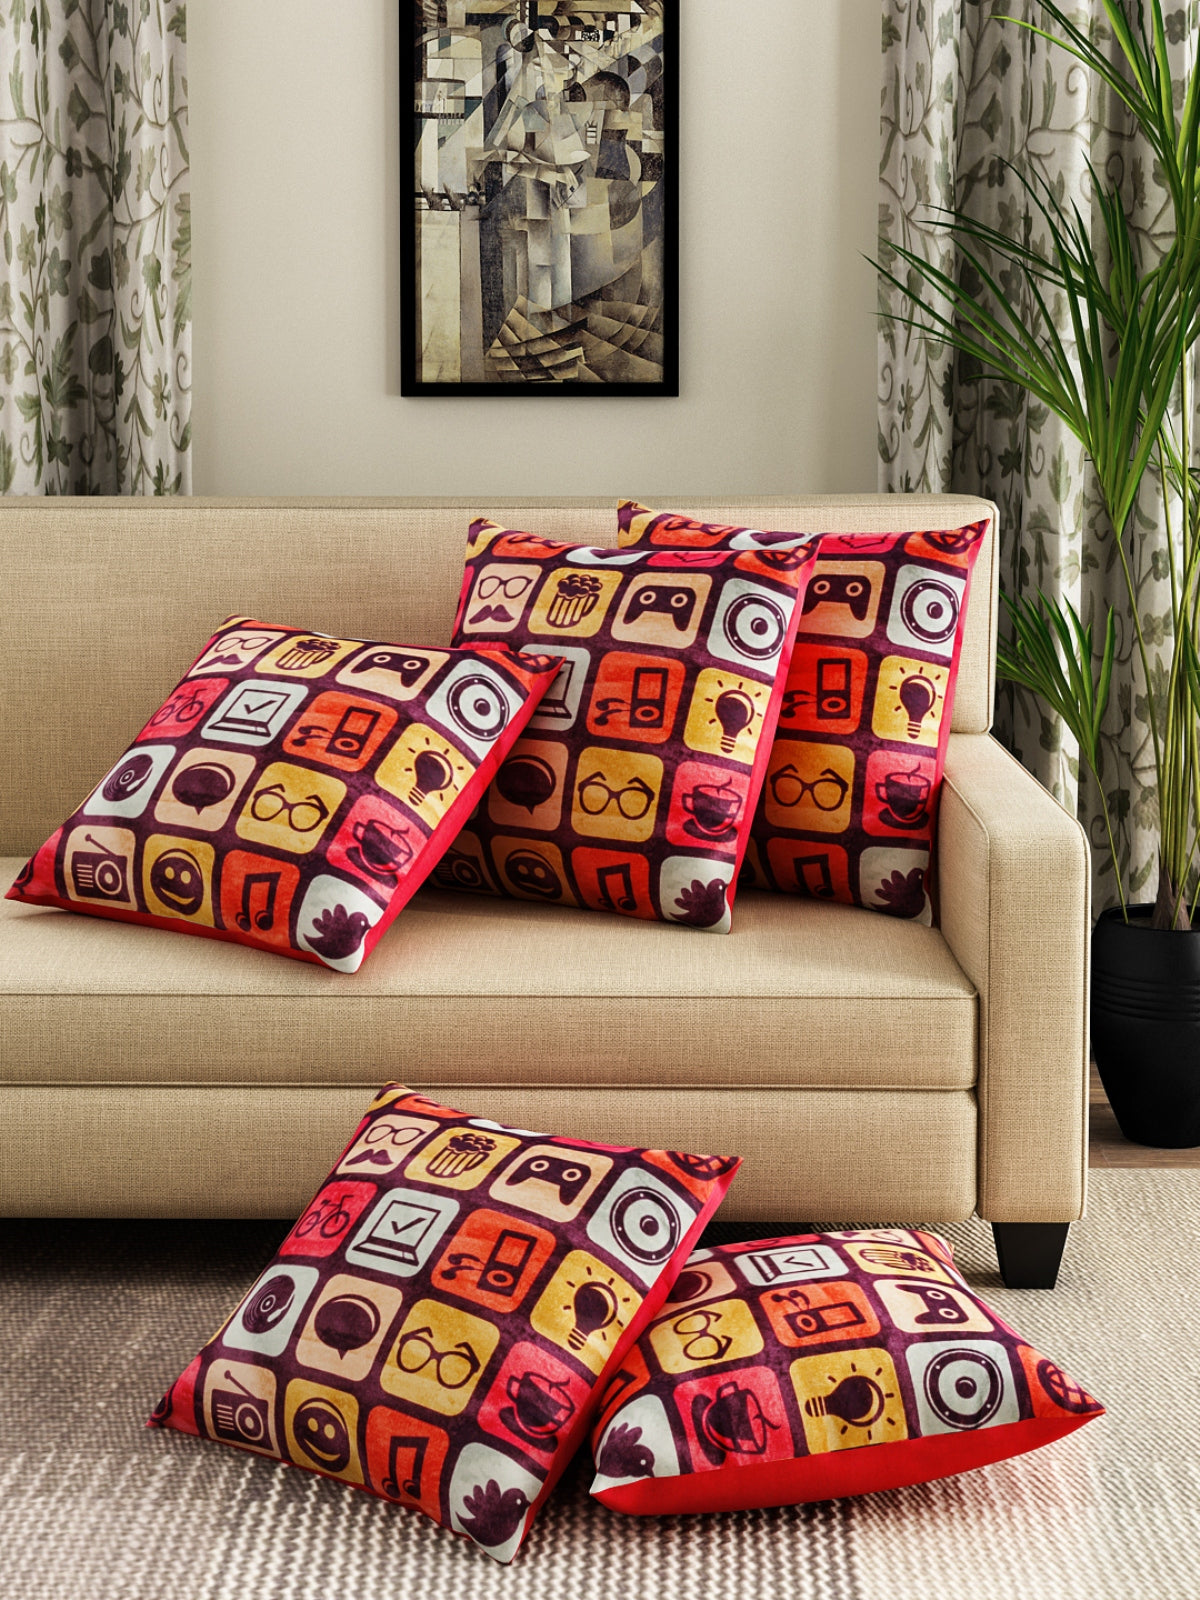 Soft Velvet Abstract Print Throw Pillow/Cushion Covers Set of 5, 16x16 inches - Multicolor